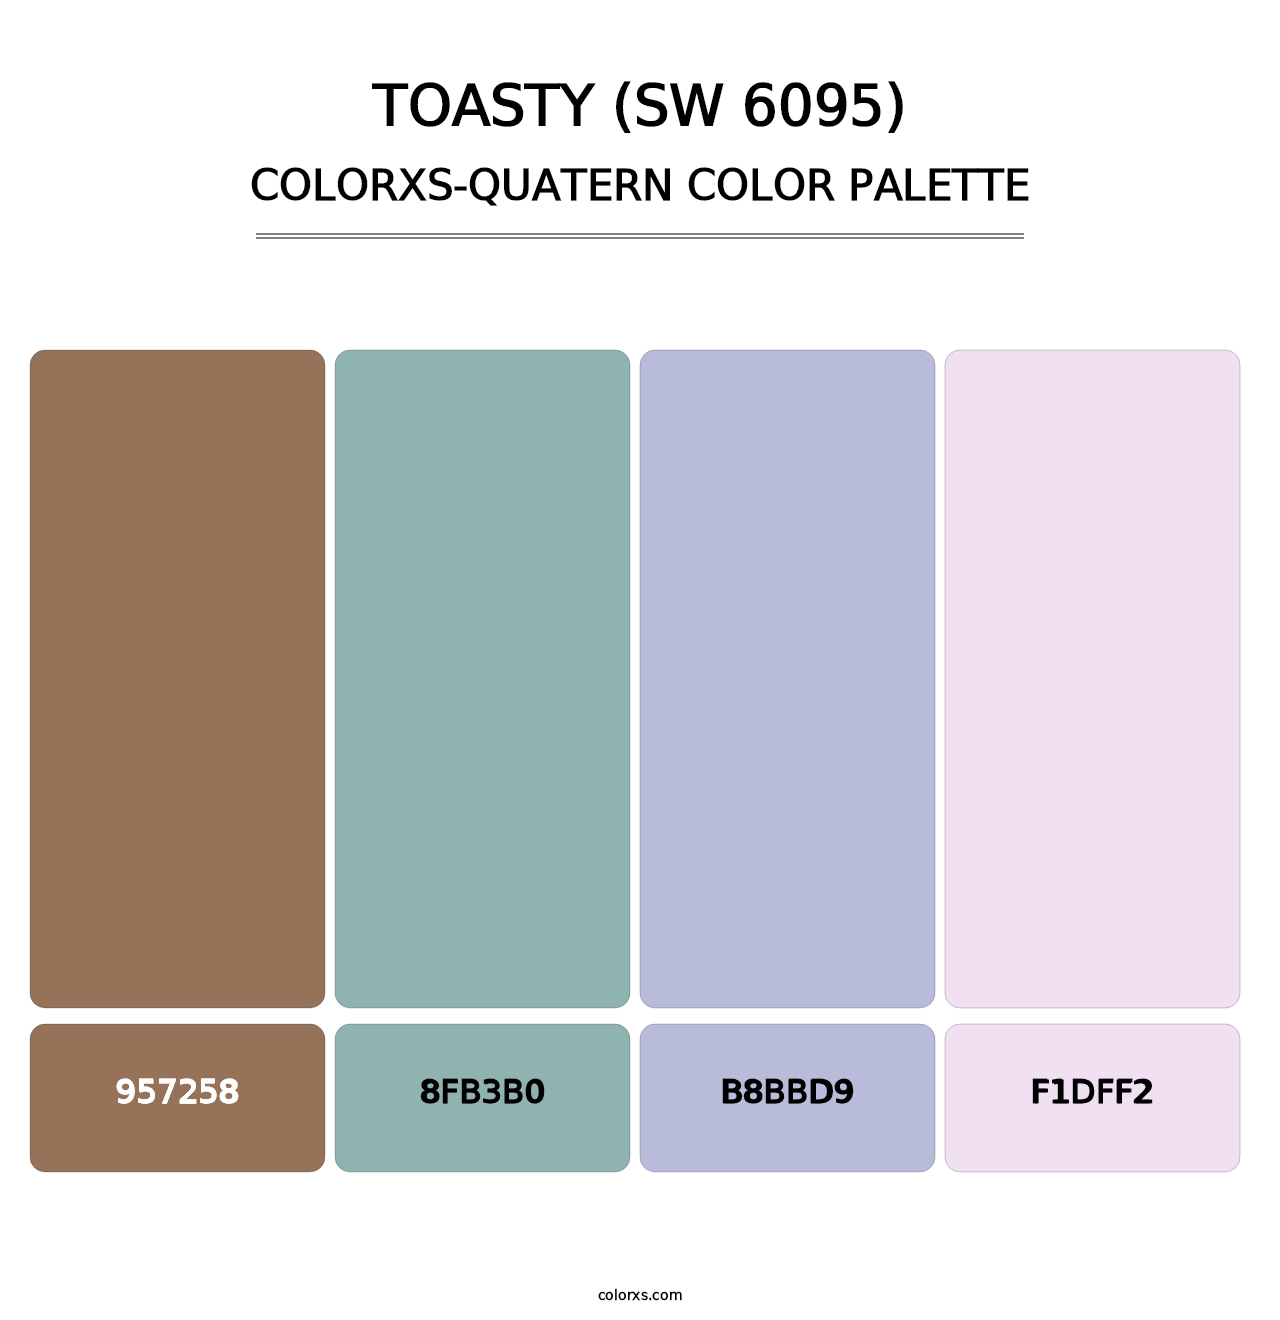 Toasty (SW 6095) - Colorxs Quatern Palette